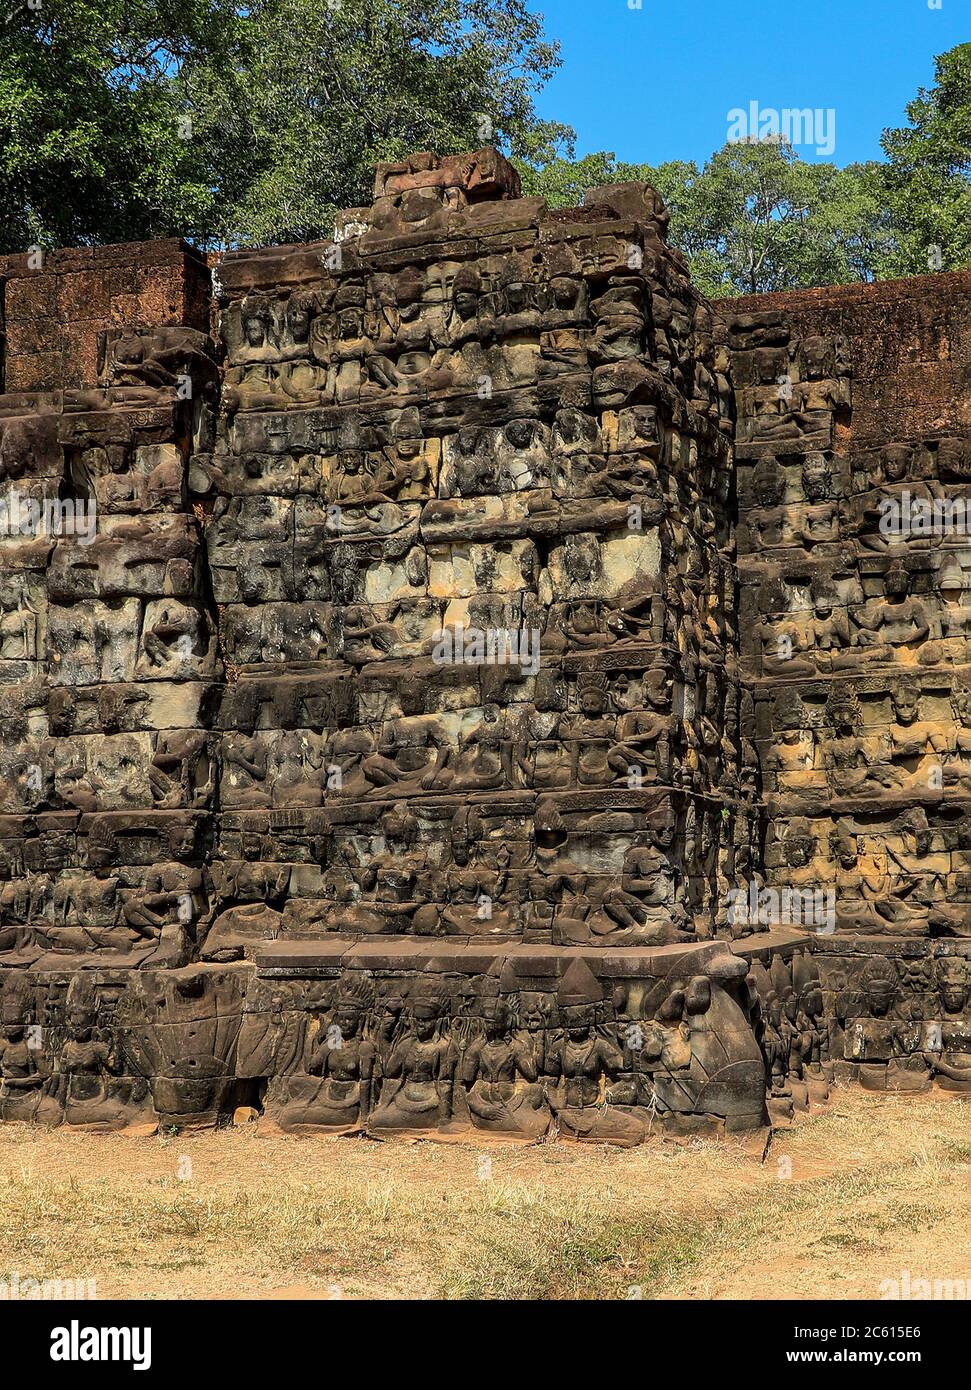 The Leper King Terrace at the Angkor Thom temple complex, Siem Reap, Cambodia, Asia Stock Photo